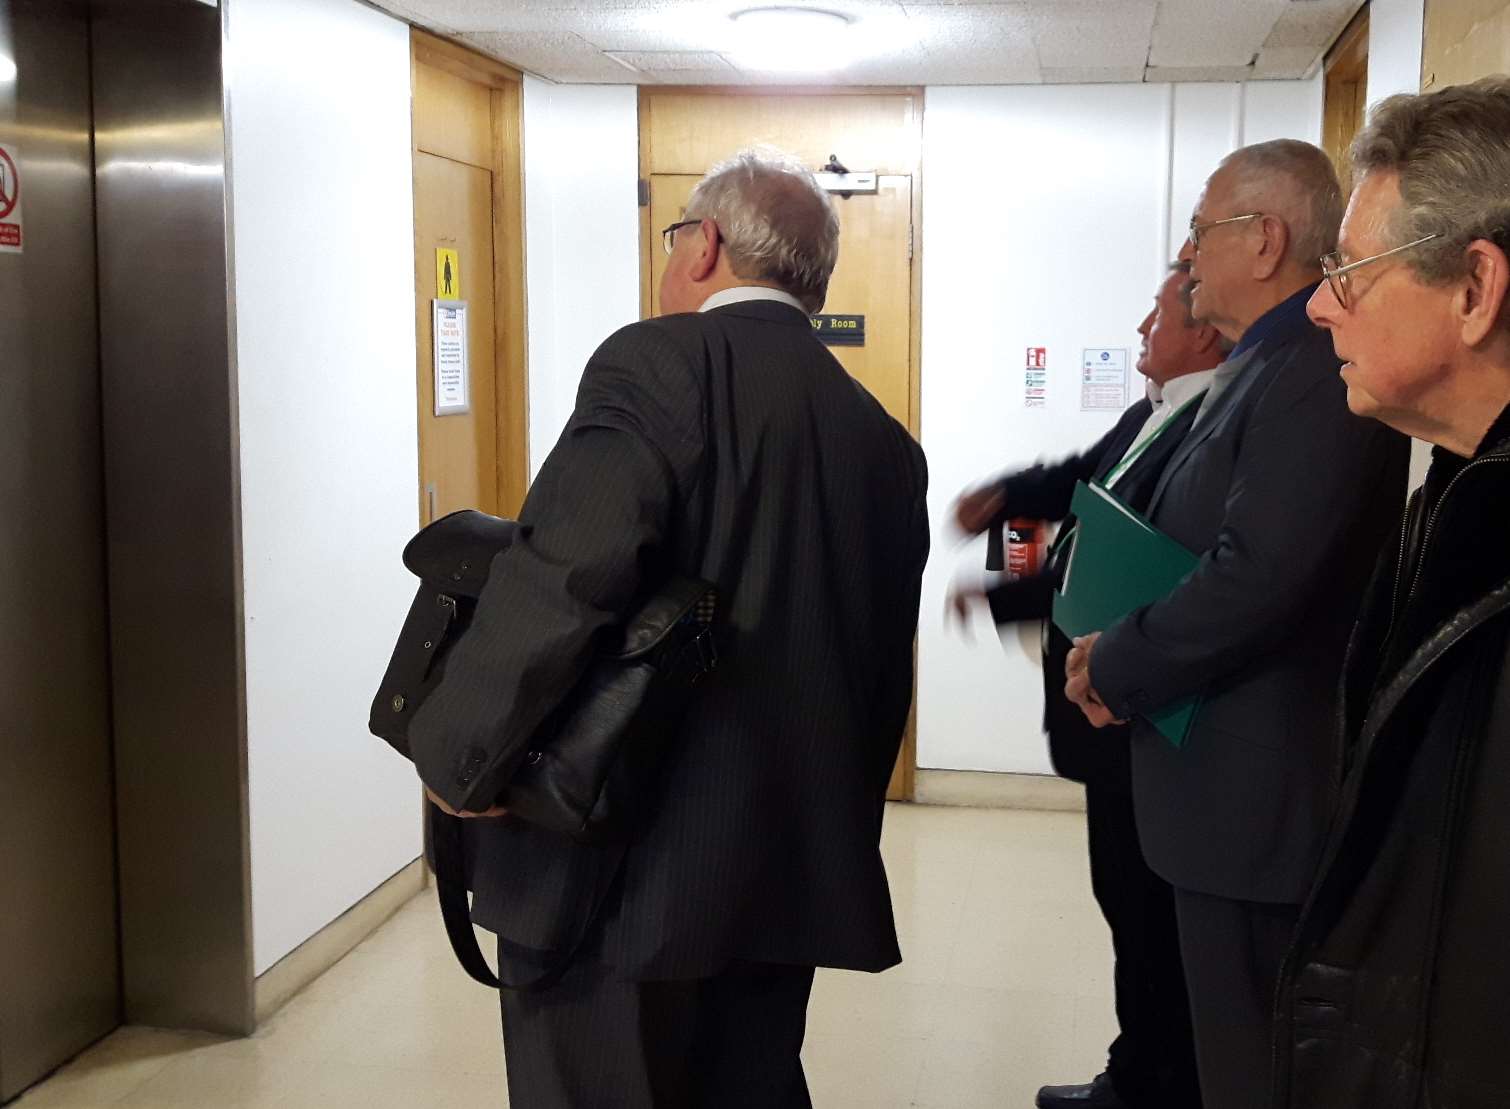 Trying to help: Swale councillors including council leader Andrew Bowles, left, and Adrian Crowther, right, study the rogue lift